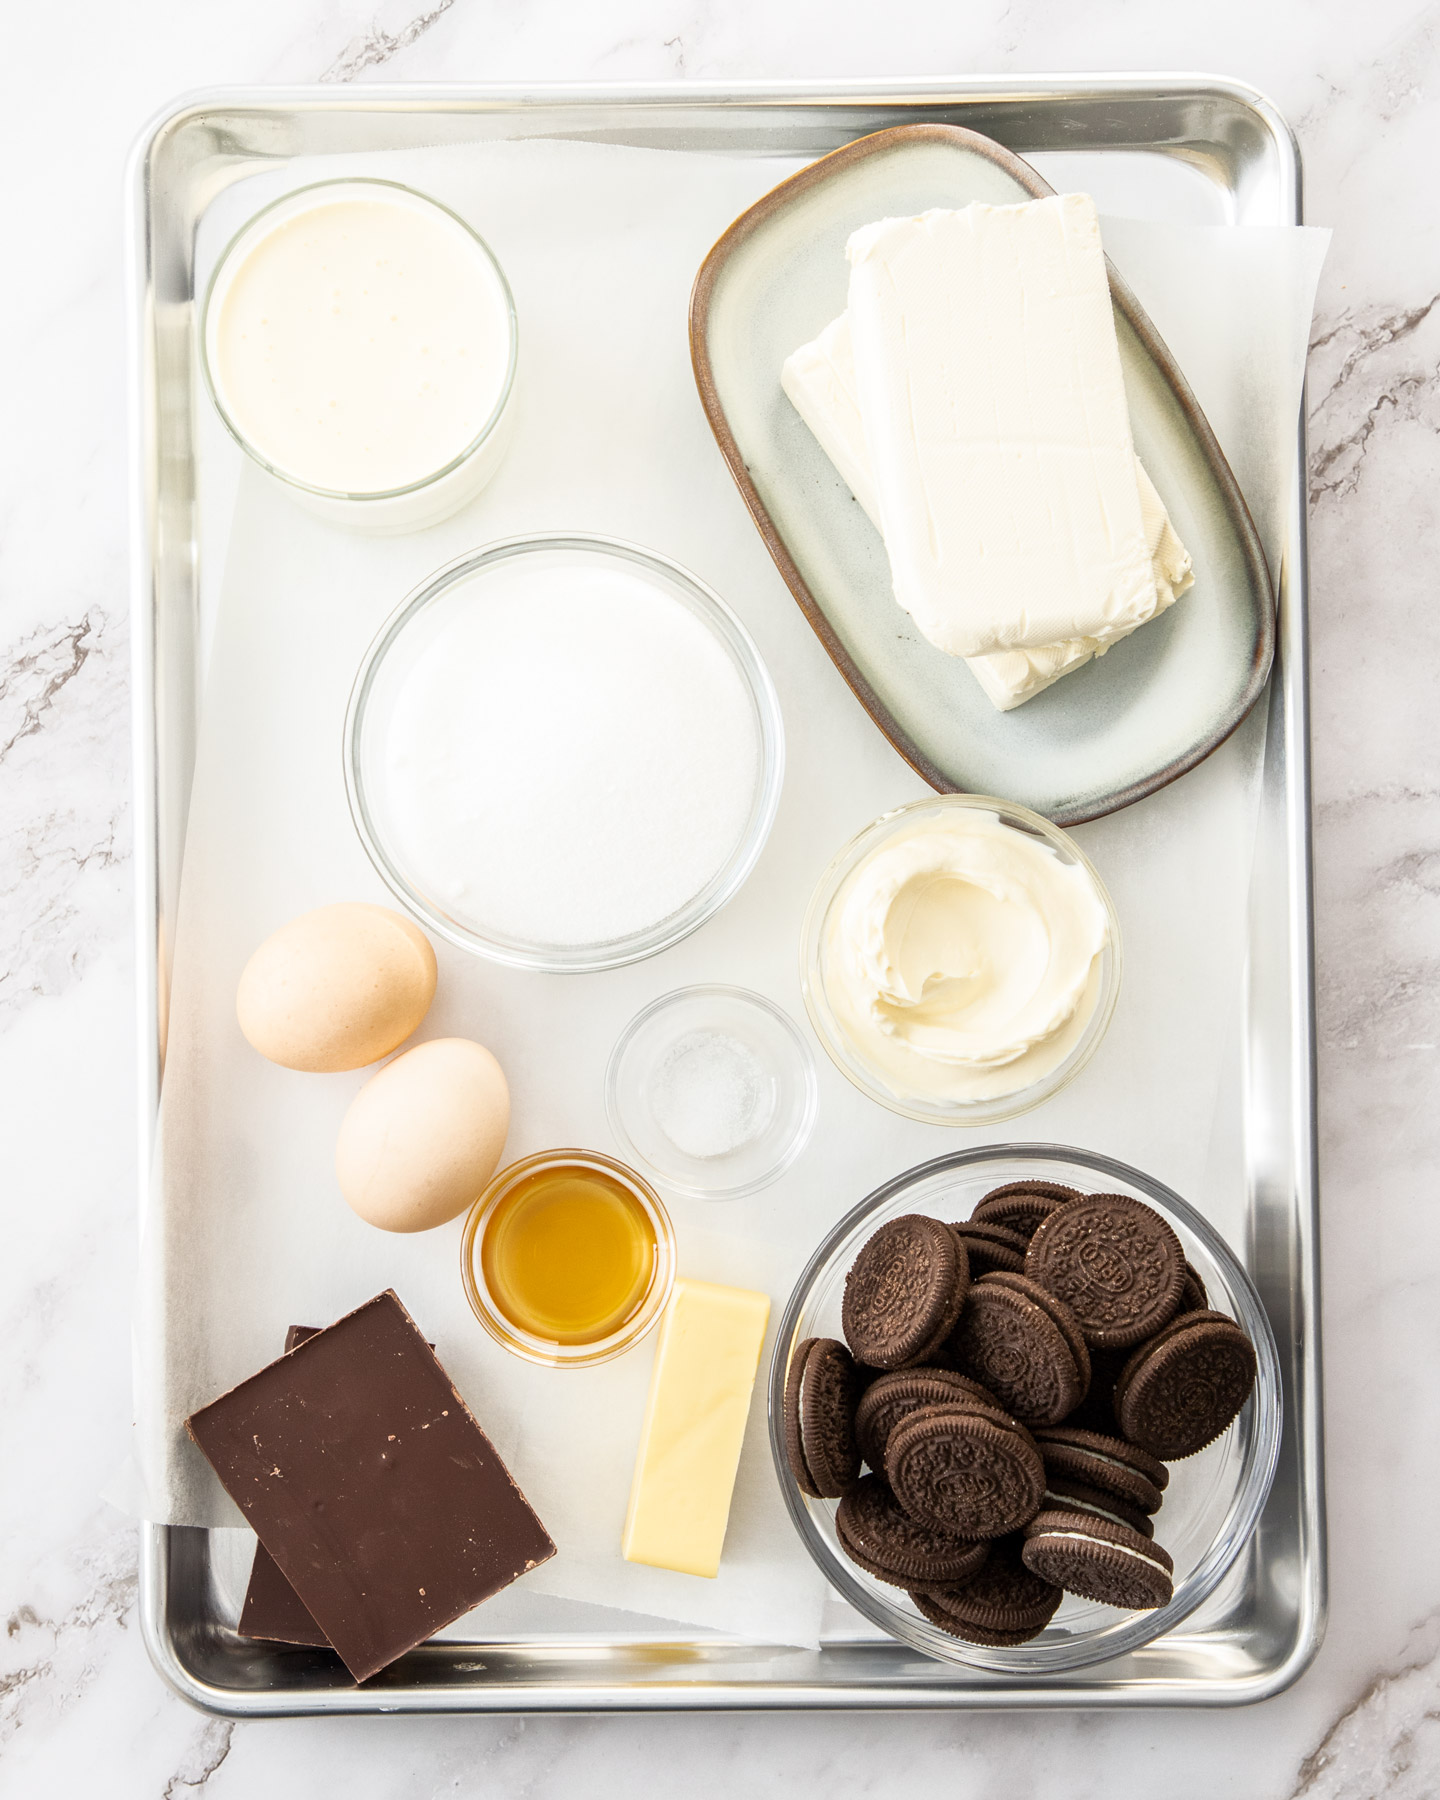 Ingredients for baked chocolate cheesecake on a baking tray.